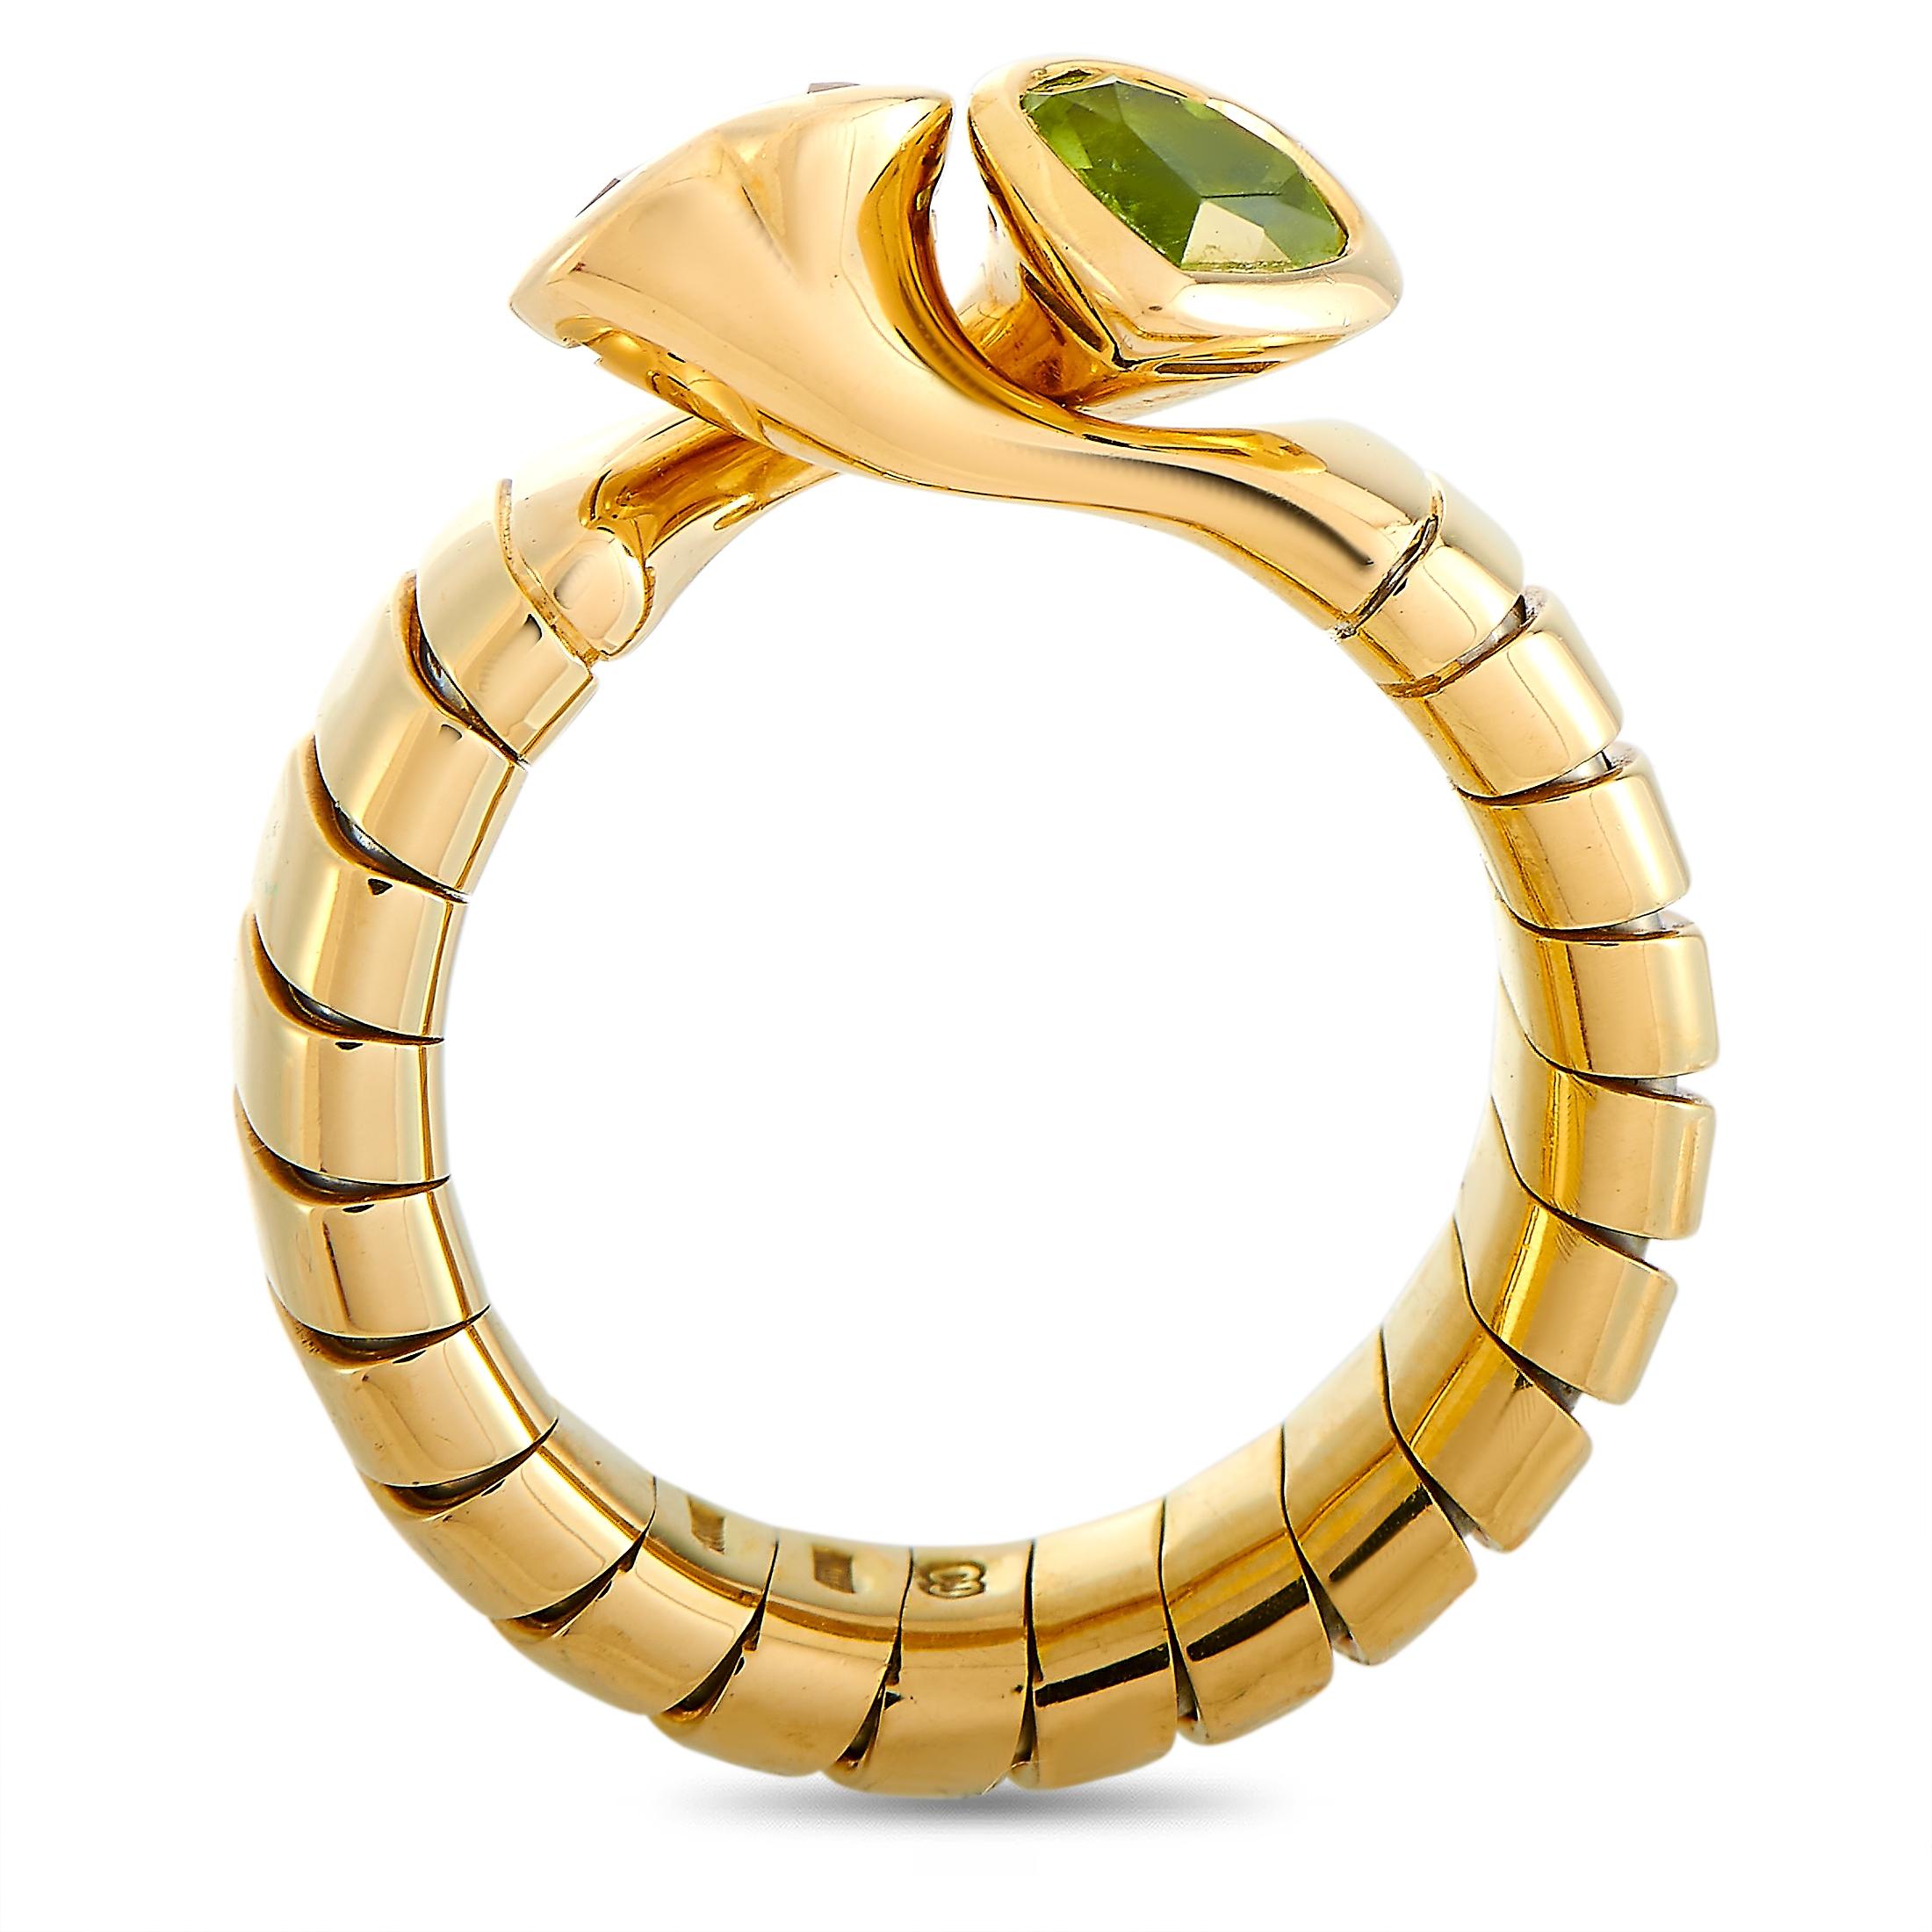 The Bvlgari ring is made of 18K yellow gold and embellished with a peridot and a citrine. The ring weighs 8.1 grams and boasts band thickness of 5 mm and top height of 5 mm, while top dimensions measure 8 by 12 mm.
 
 This jewelry piece is offered